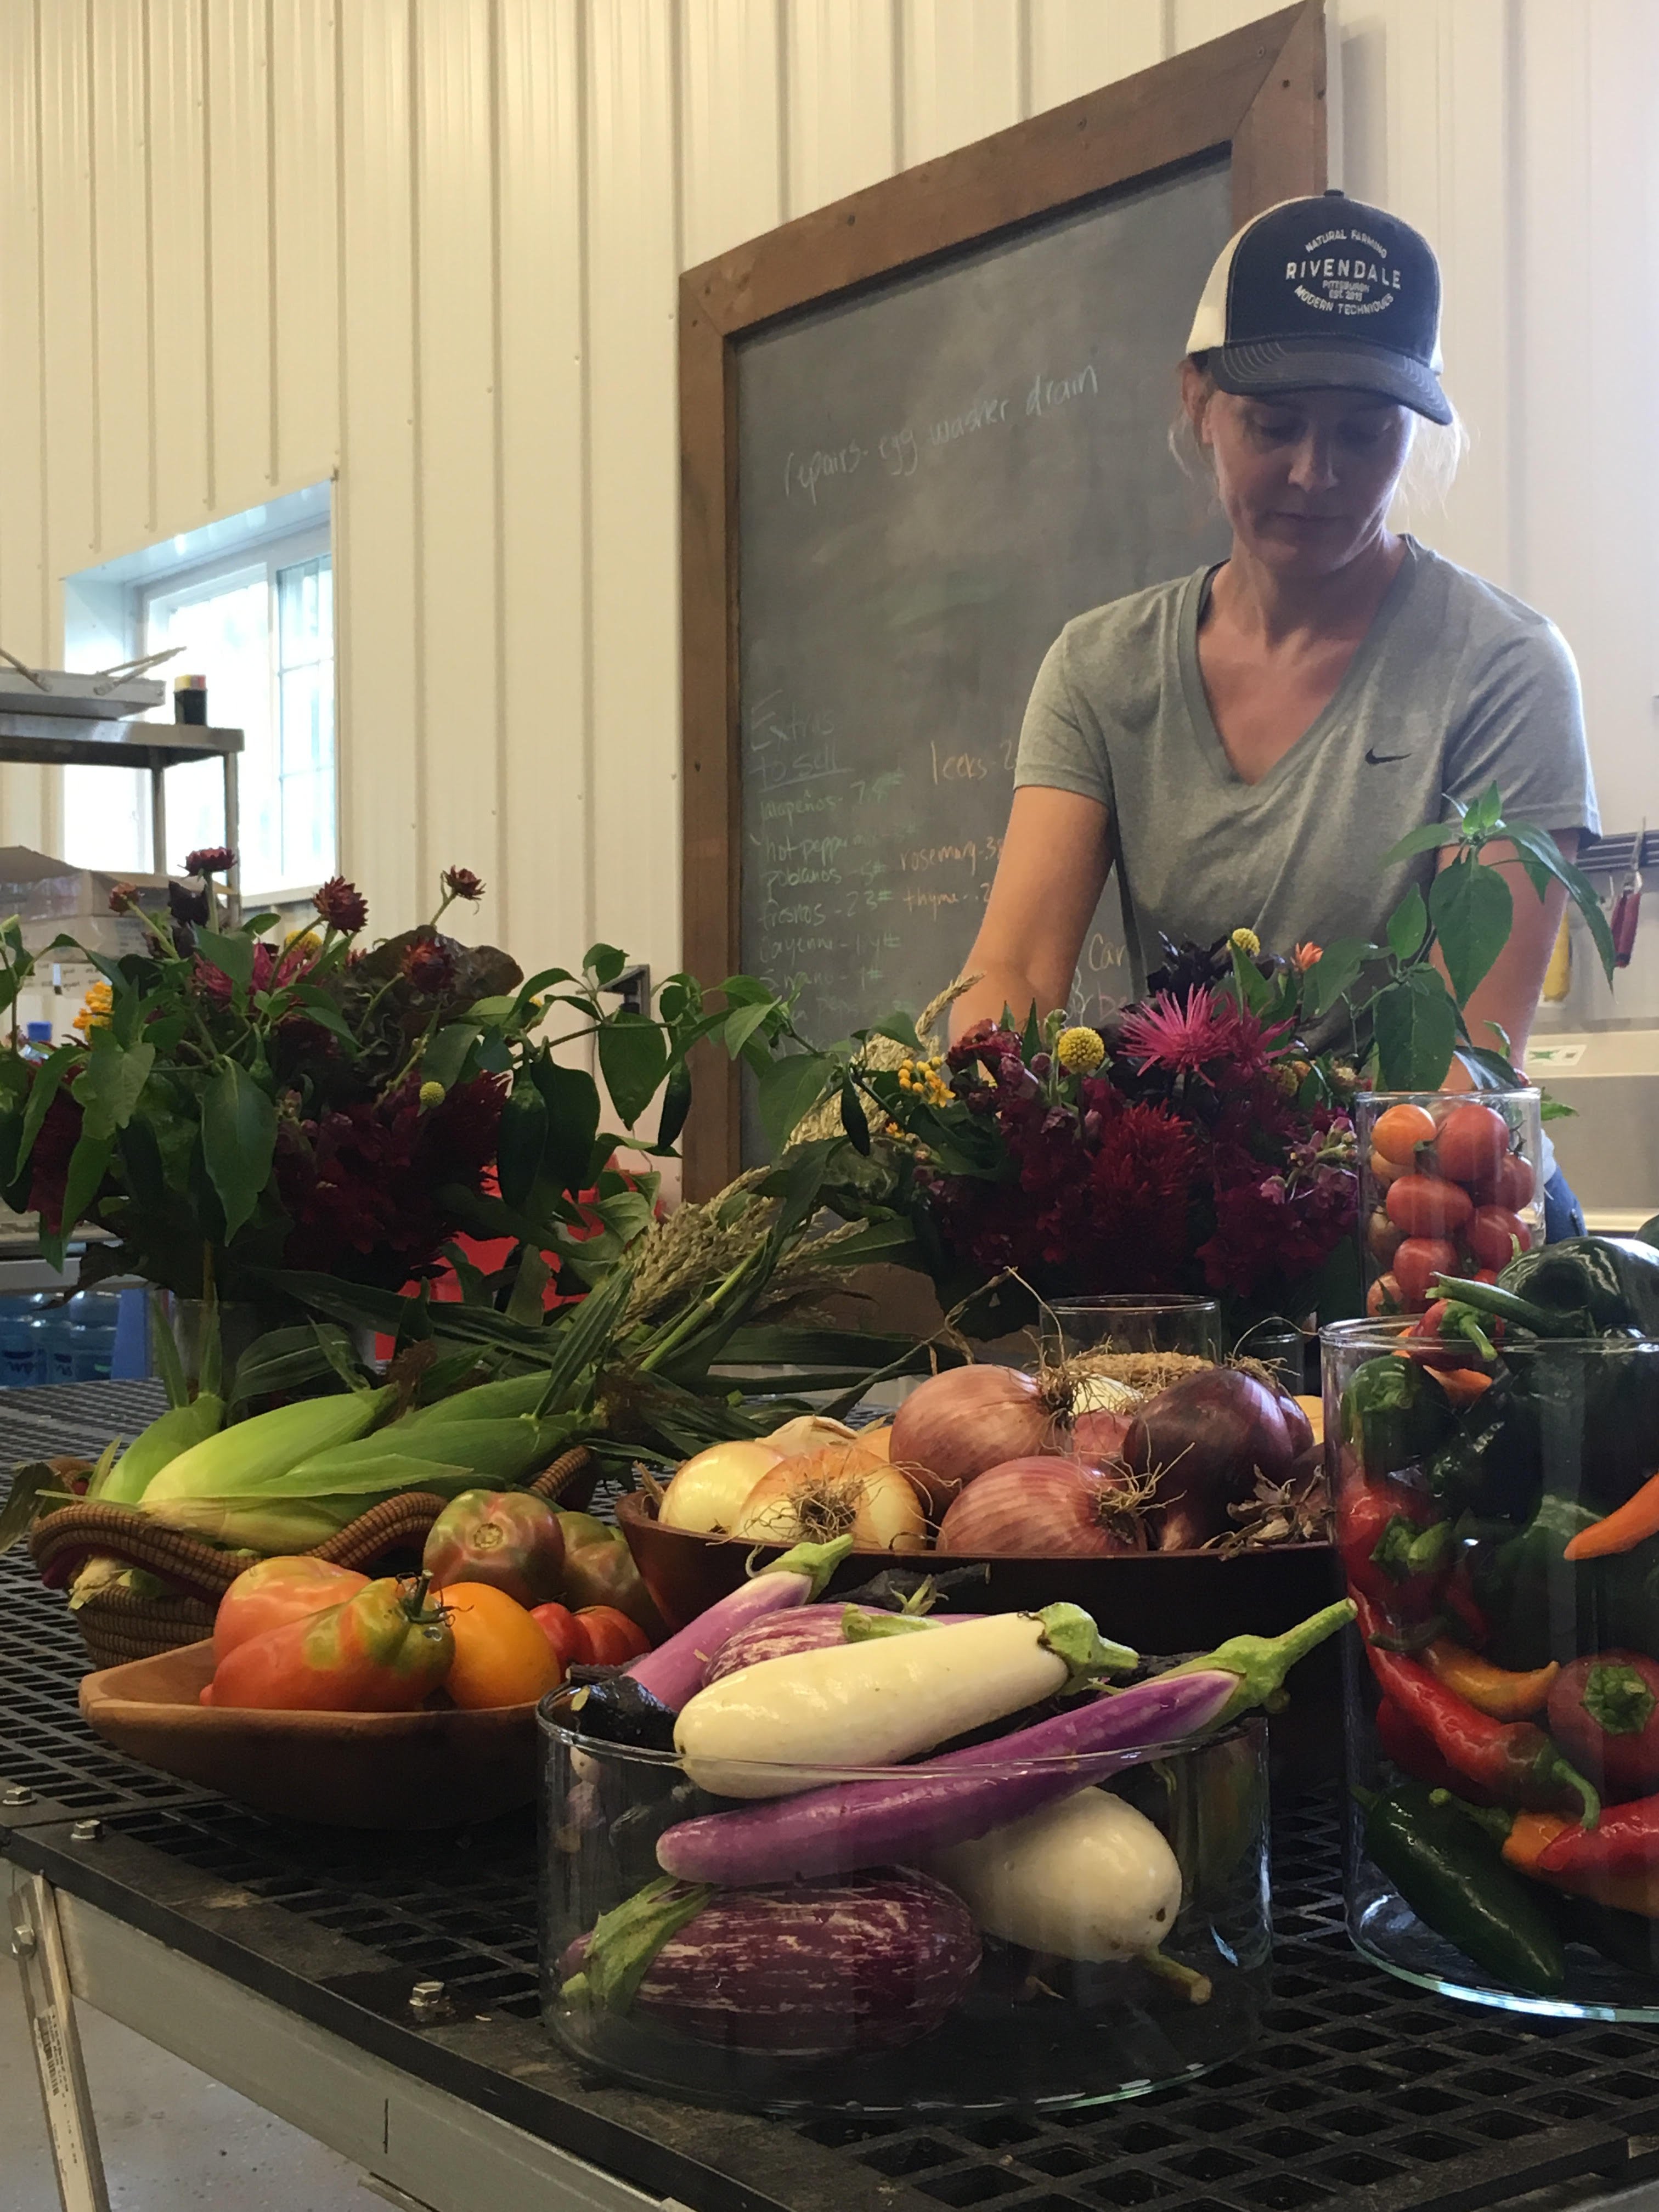 Previous Happening: Rivendale Farms CSA Newsletter, Week 11 (August 21)